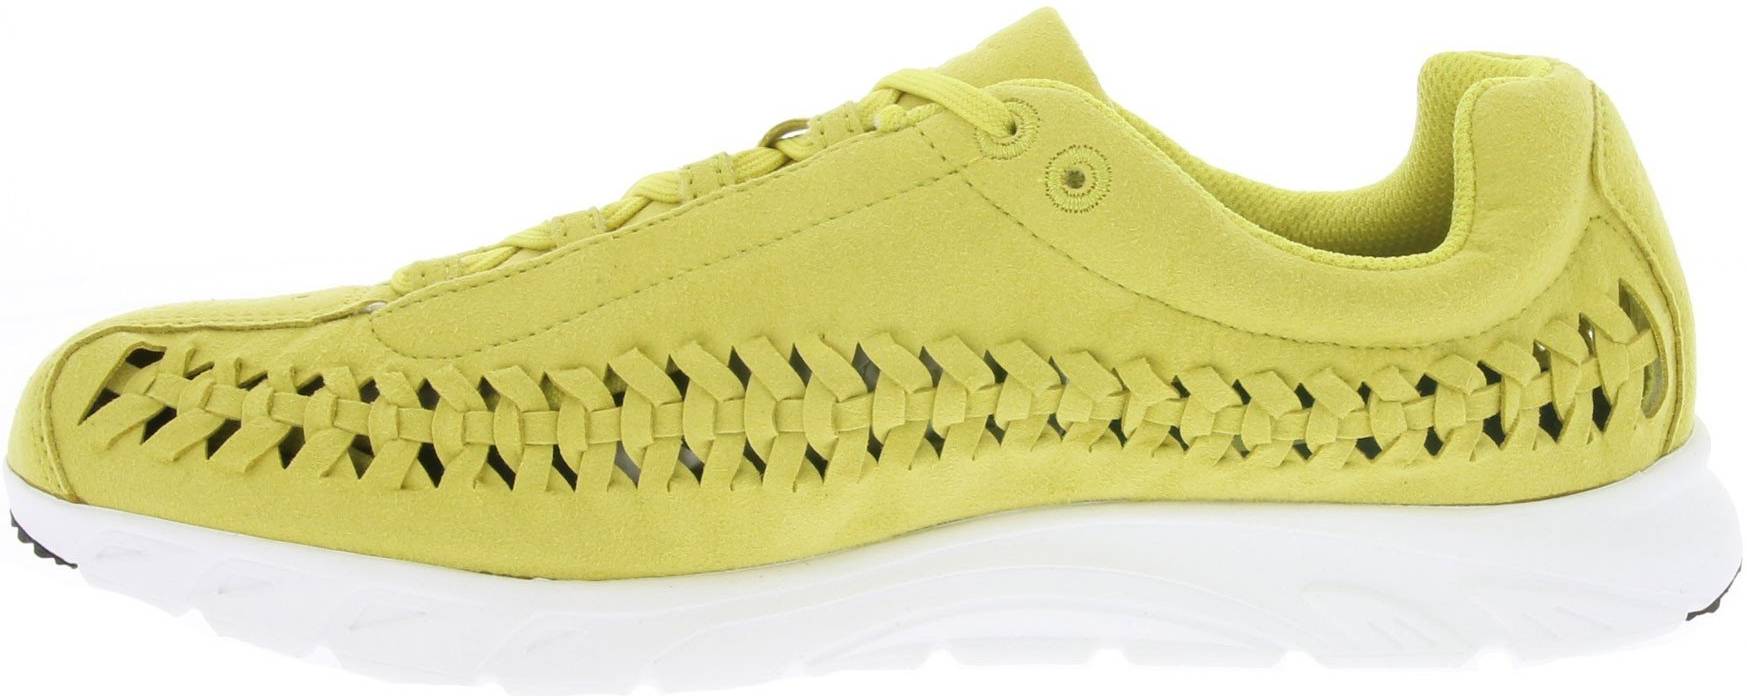 Nike Mayfly Woven sneakers in 6 colors 